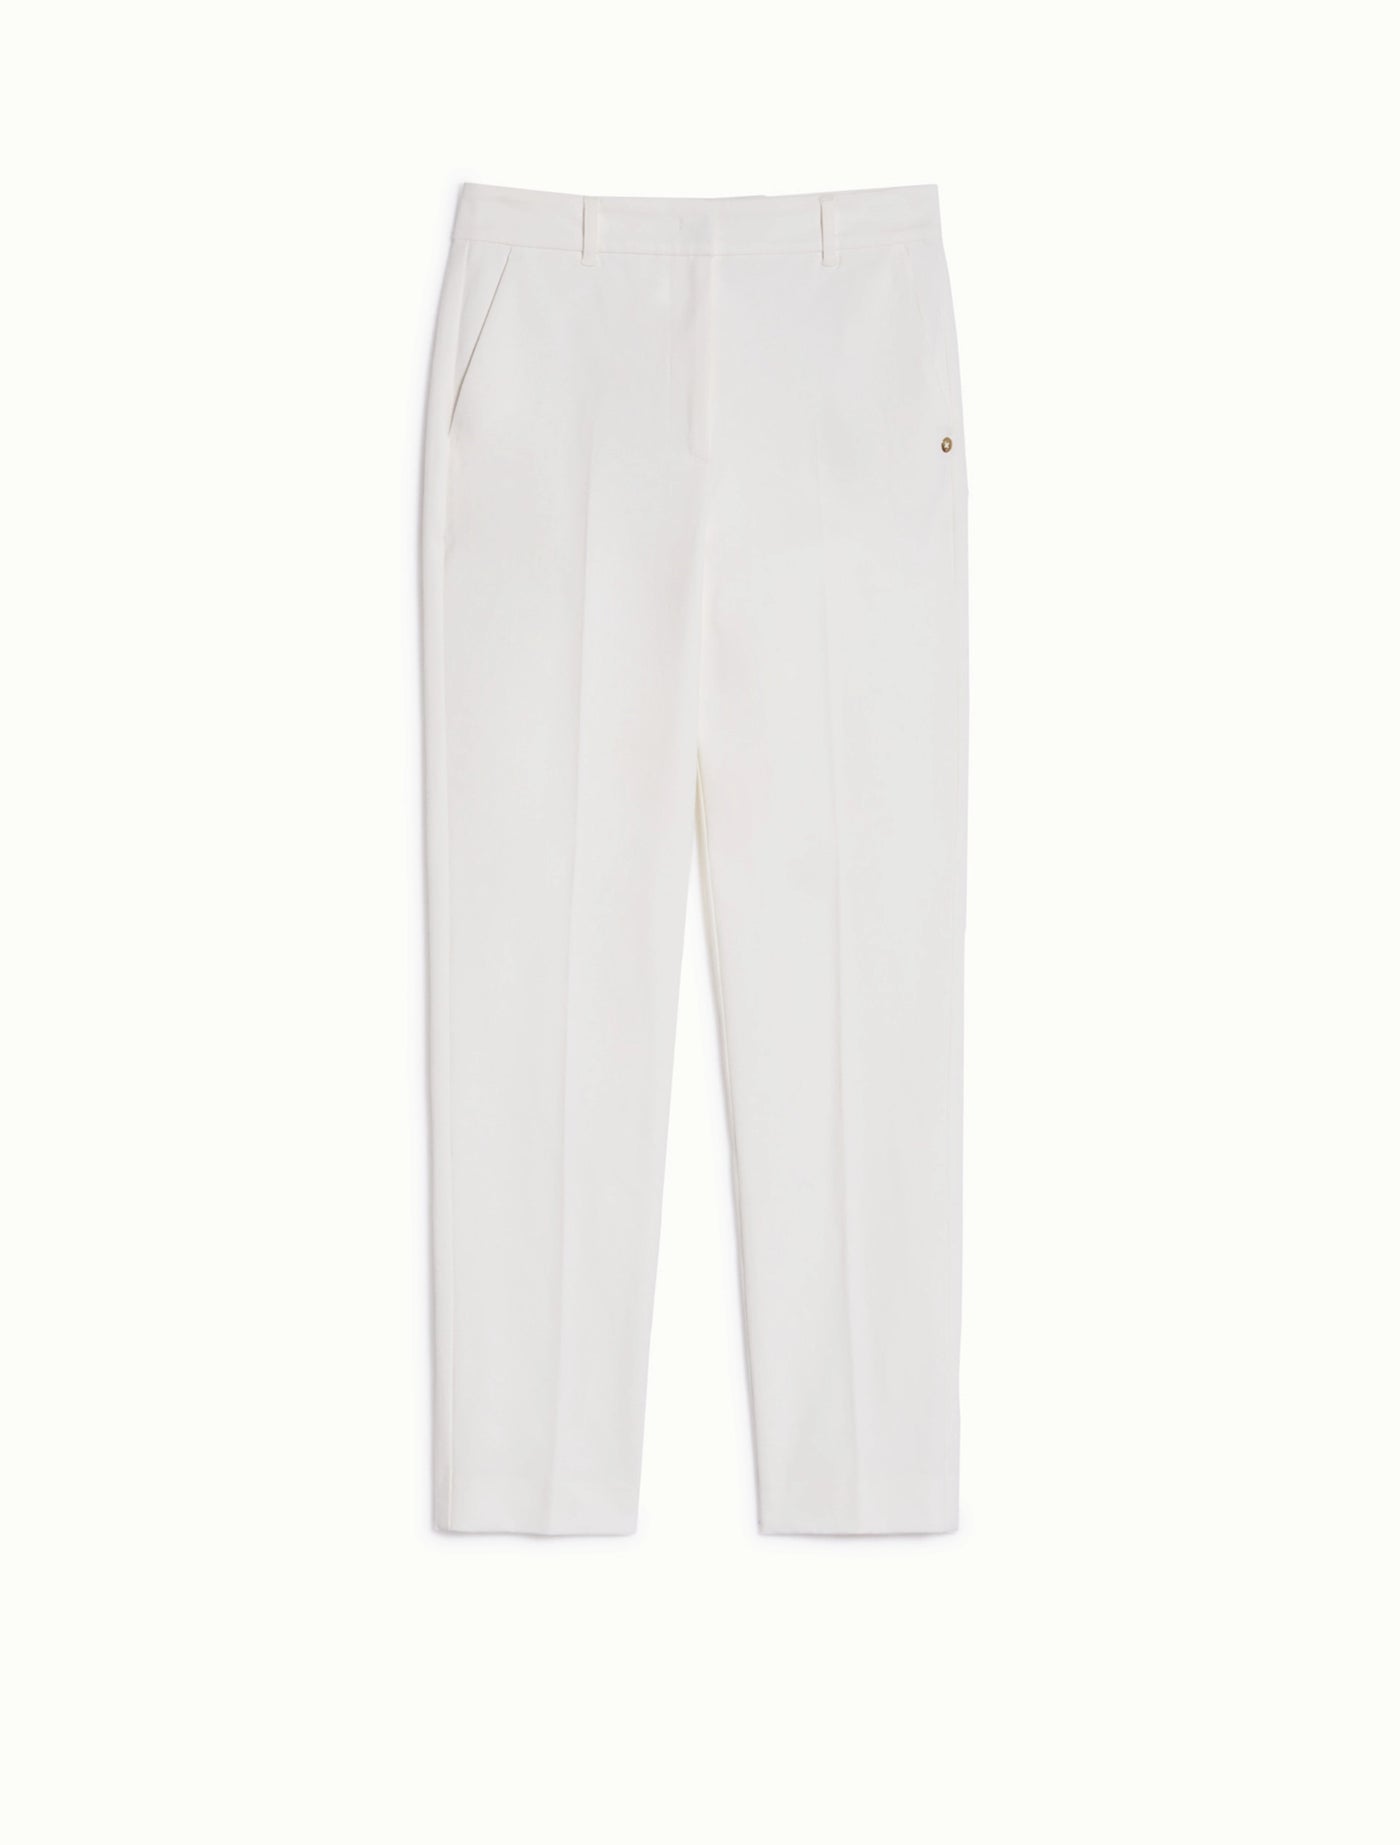 Penny Black Slim Fit Cotton Trousers | Natural